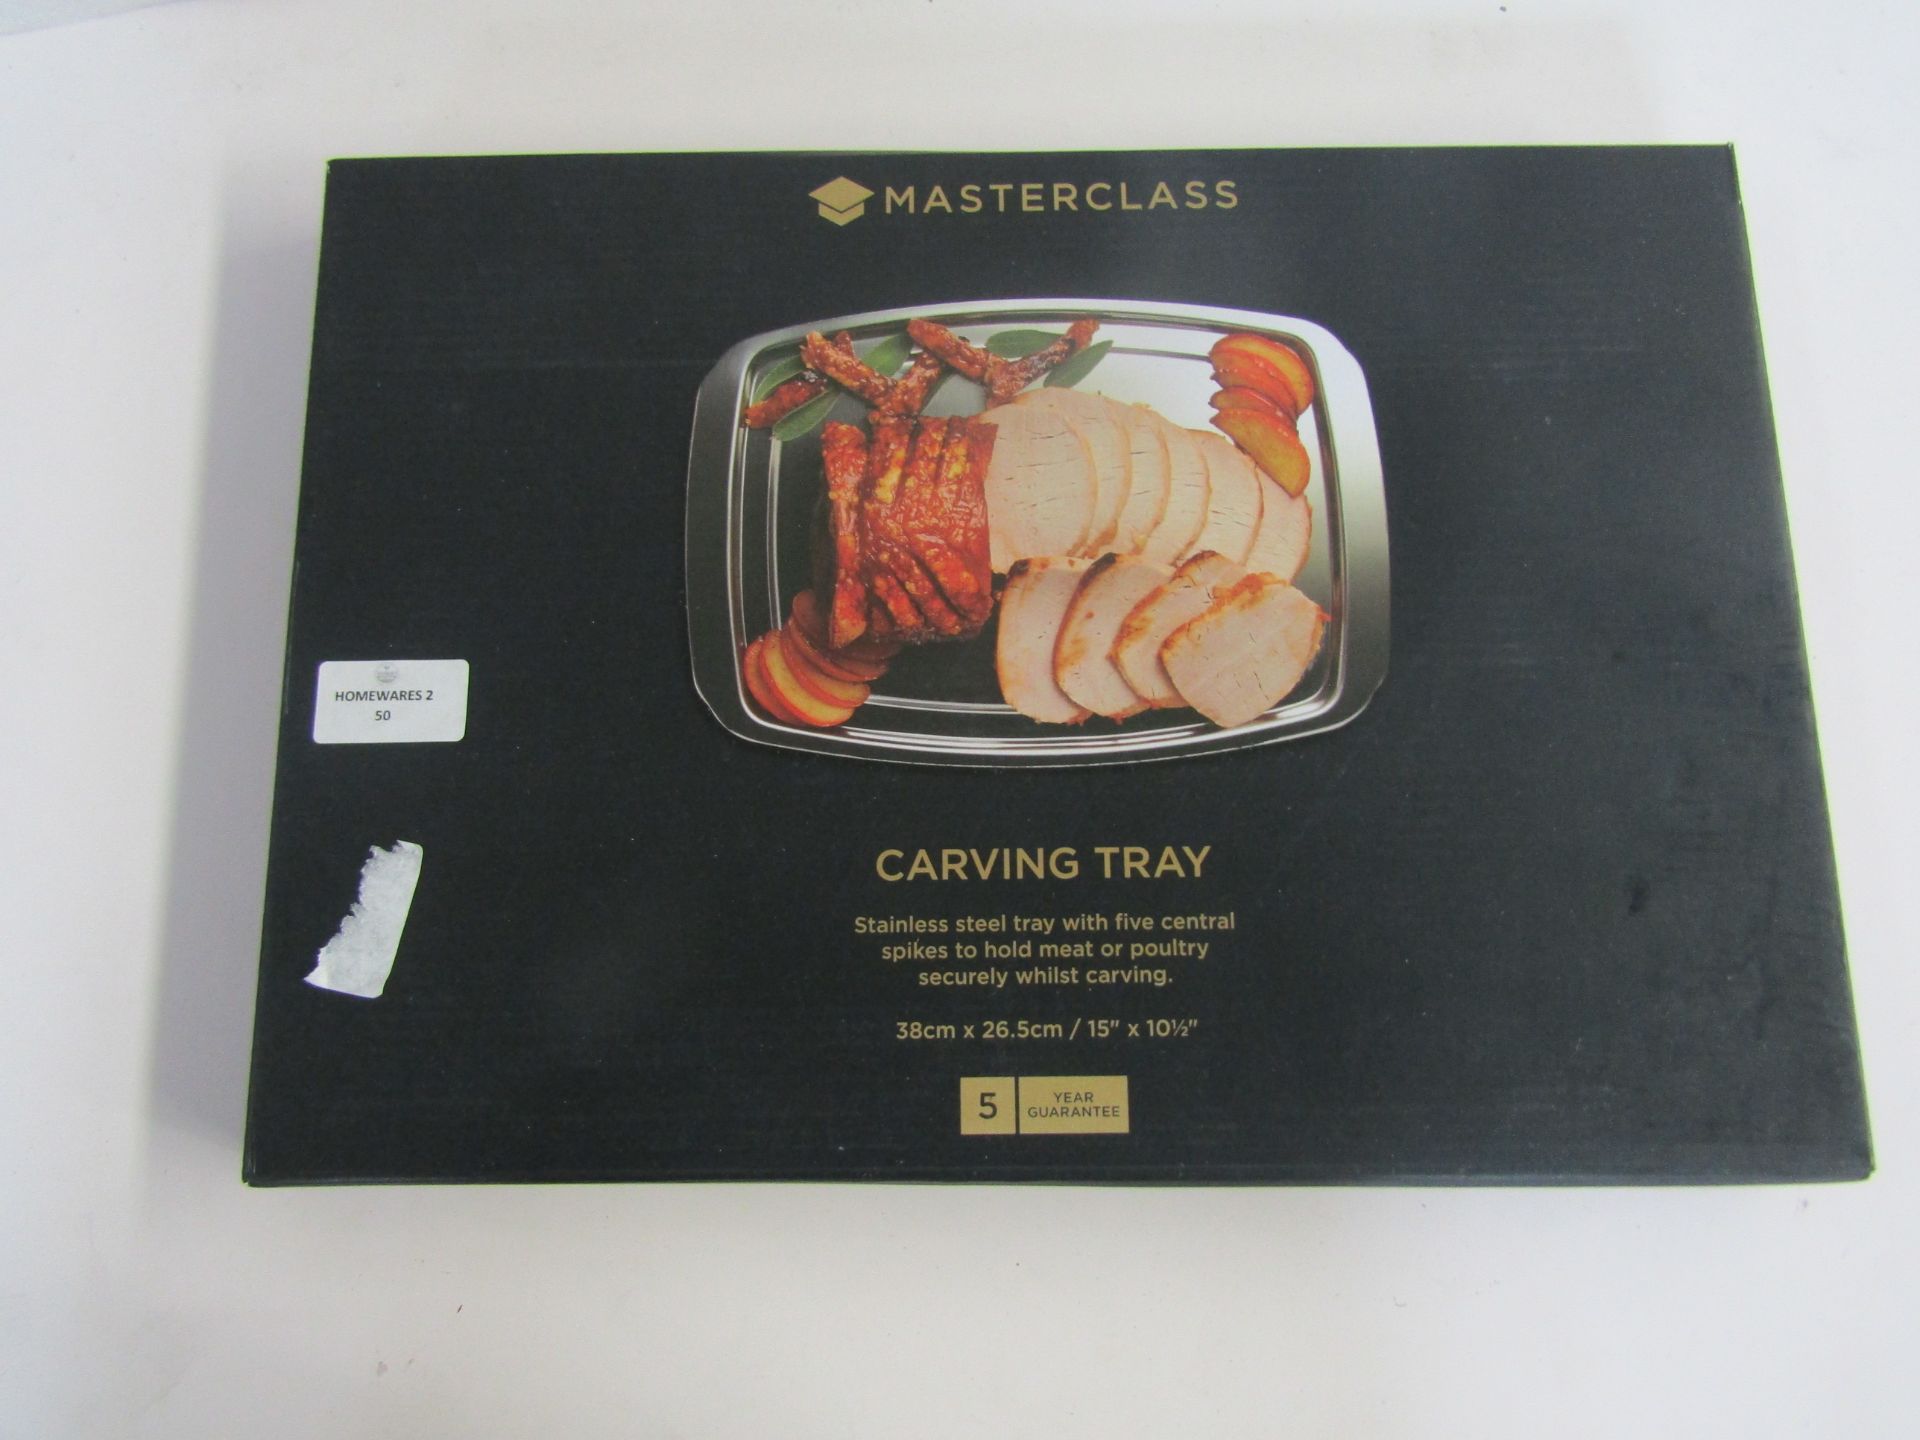 Masterclass - Stainless Steel Carving Tray - Boxed.